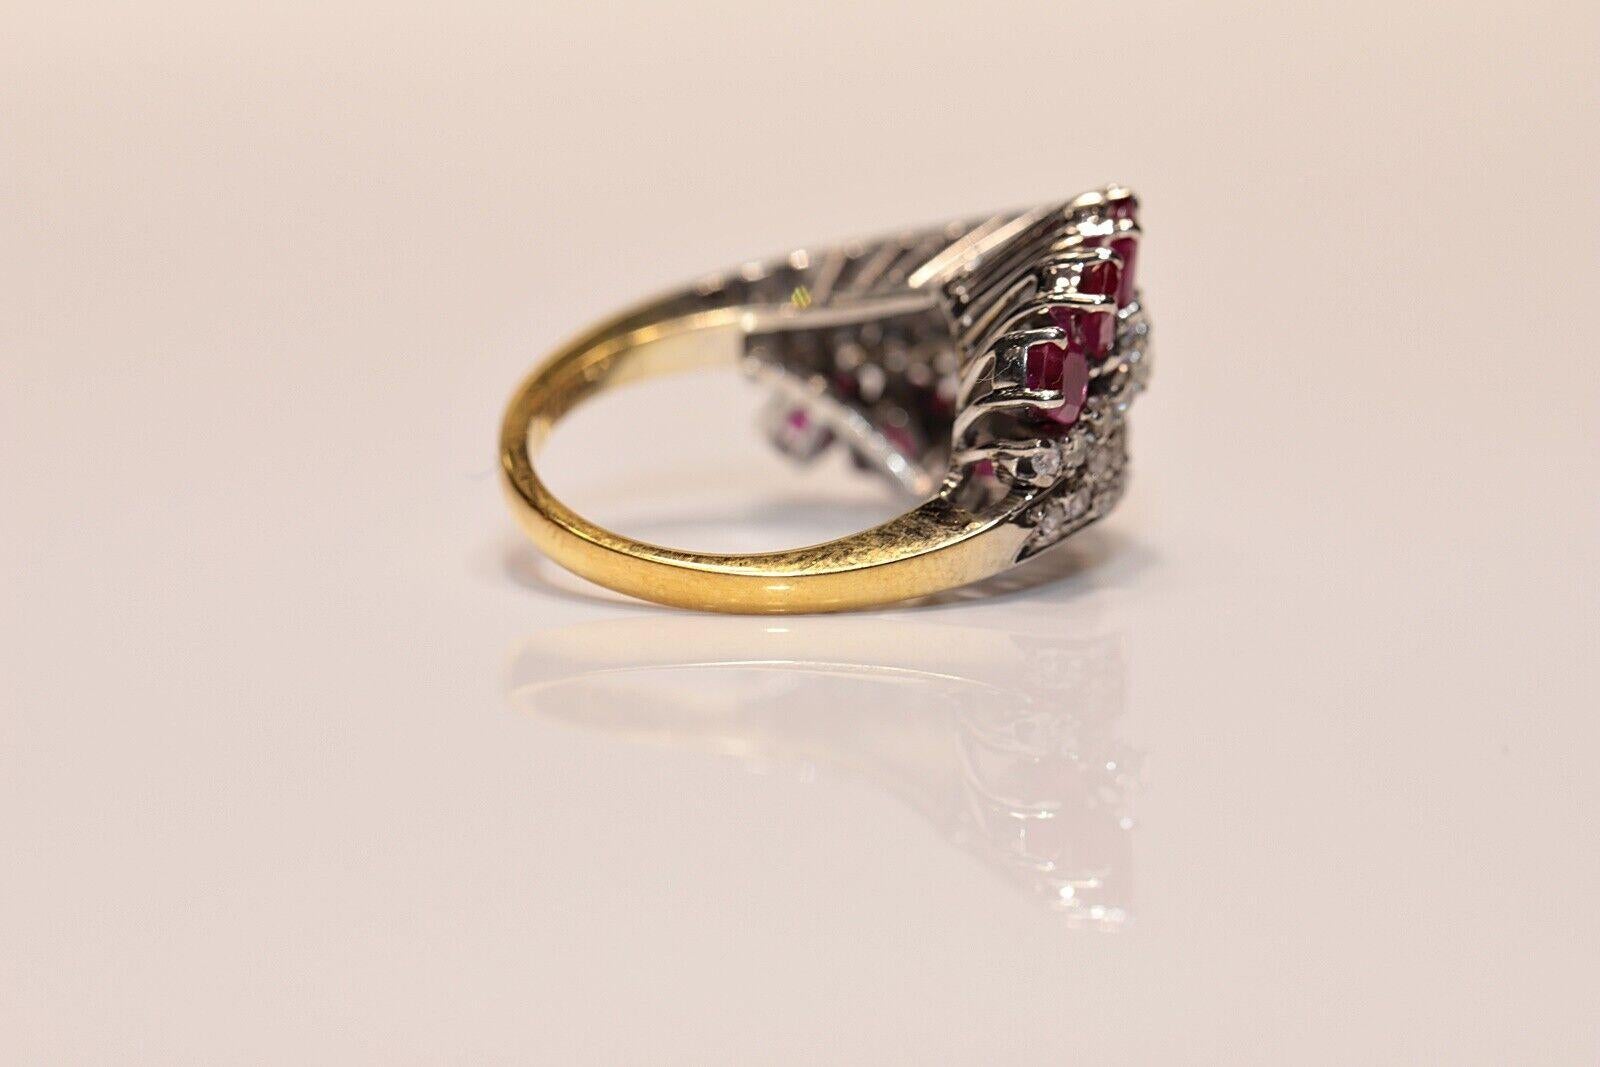 Vintage Circa 1970s 14k Gold Natural Diamond And Ruby Decorated Ring In Good Condition For Sale In Fatih/İstanbul, 34